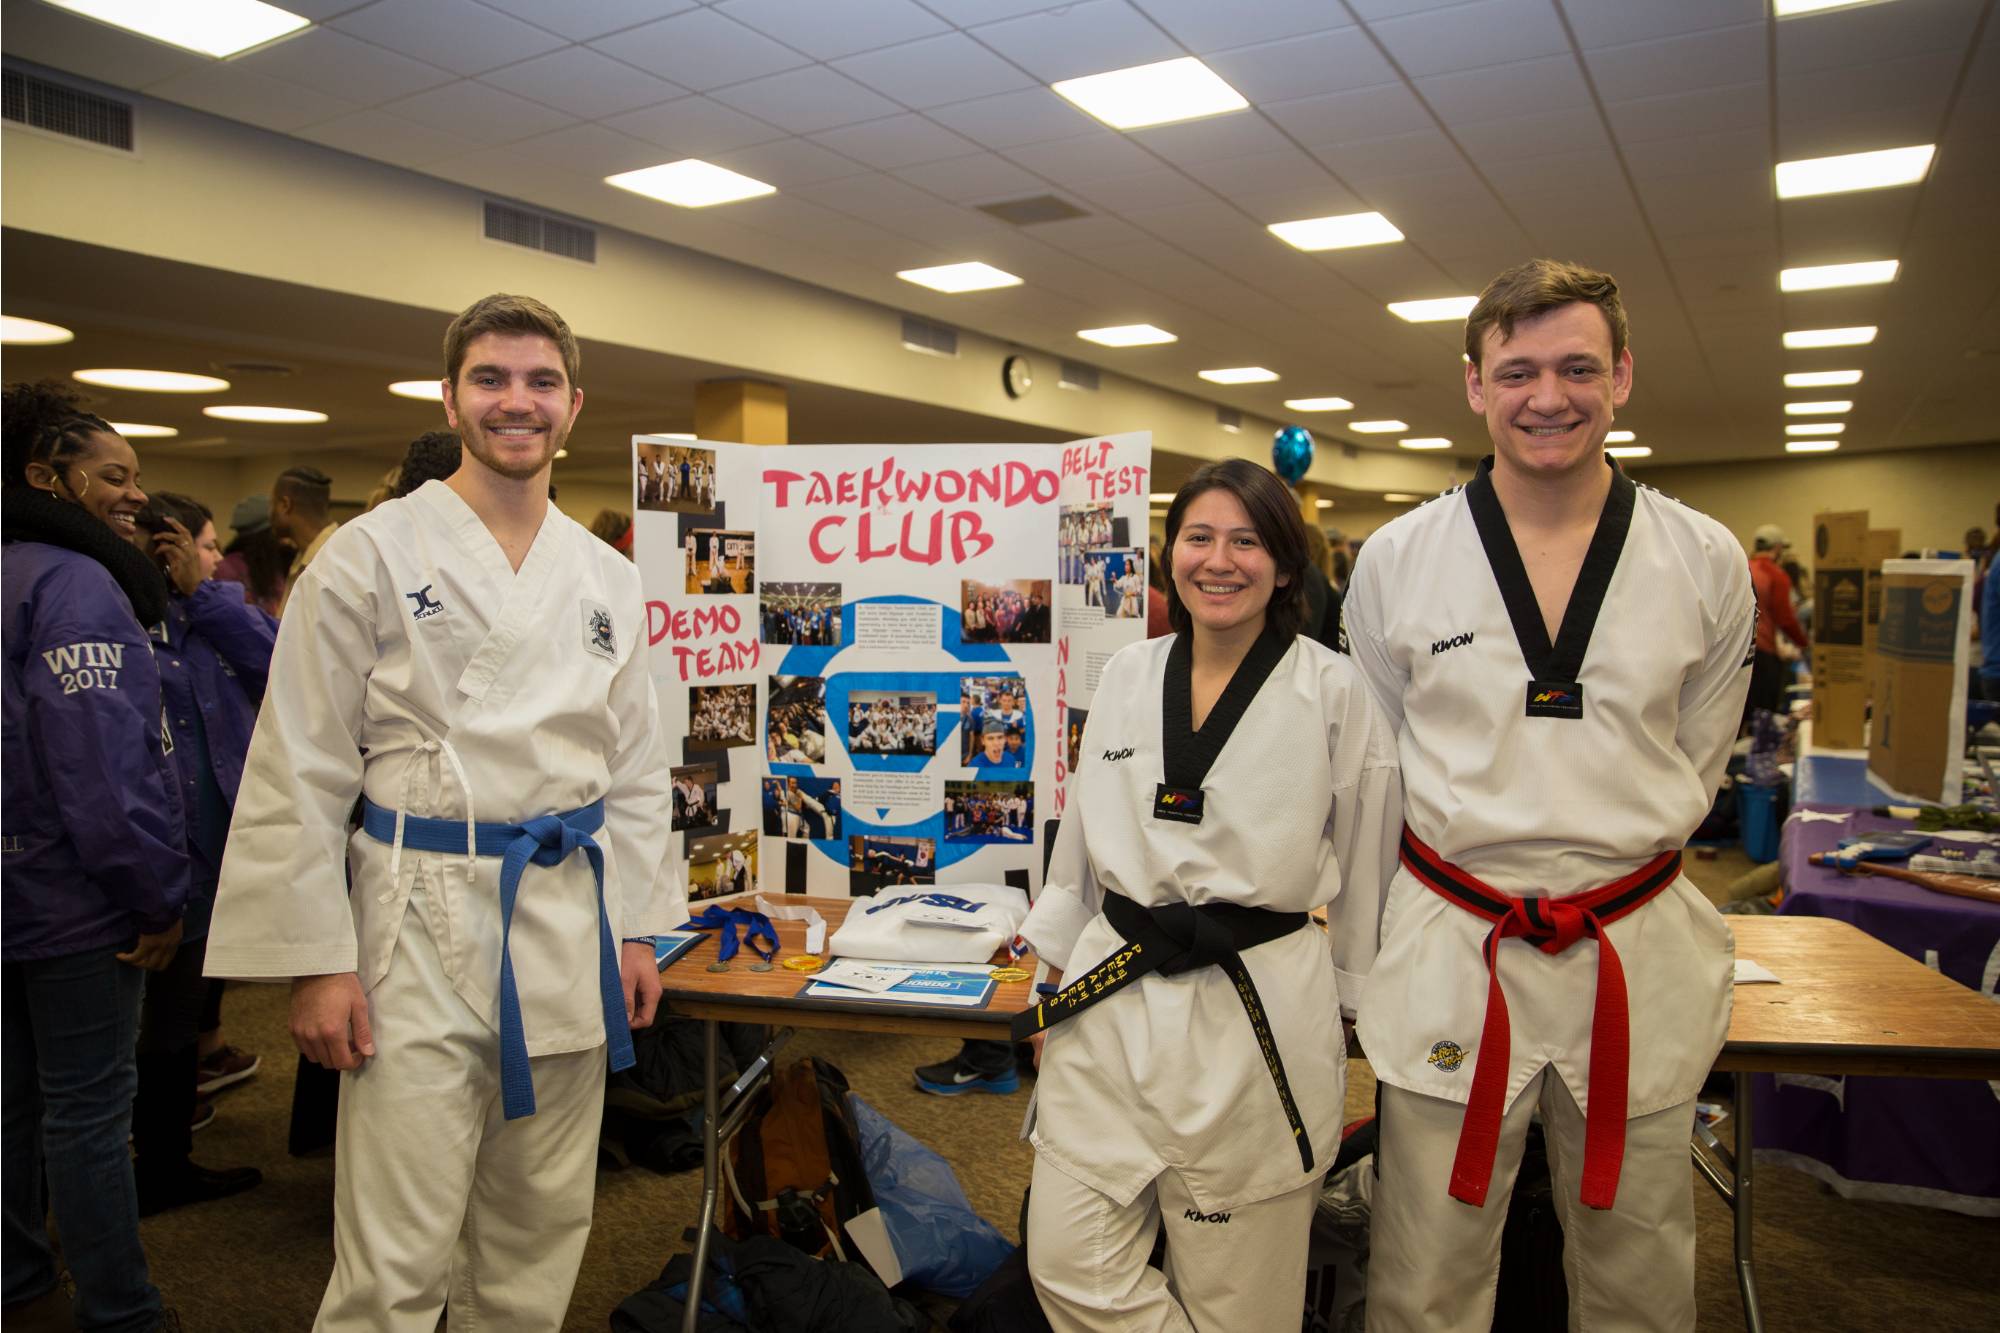 The taekwondo club smiling in front of their sign at campus life night